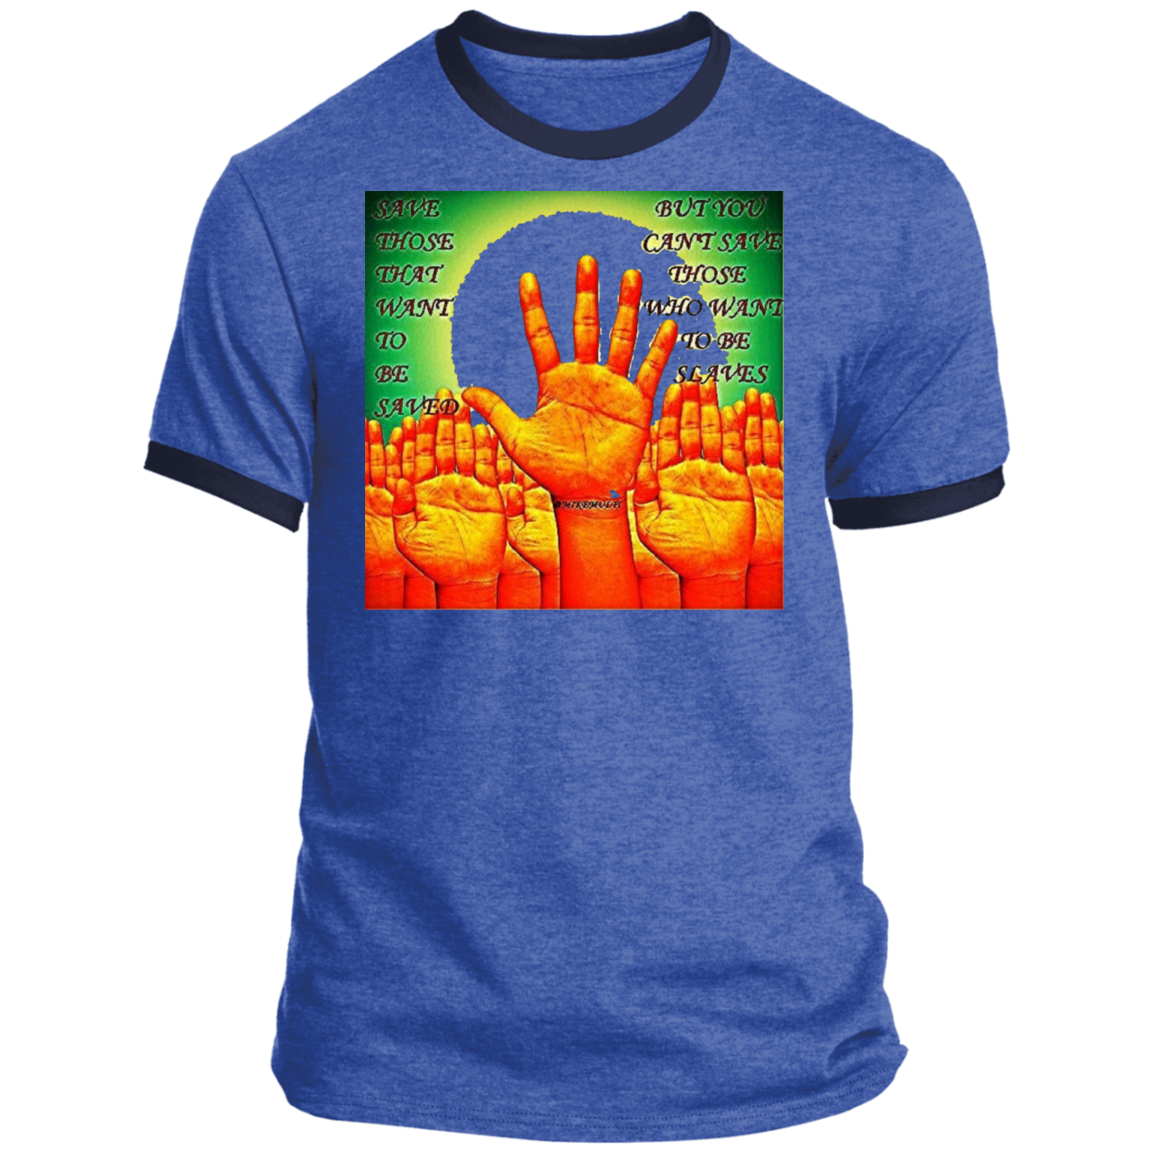 Multi - Save Those That Want To Be Saved - Men's Ringer T-shirt